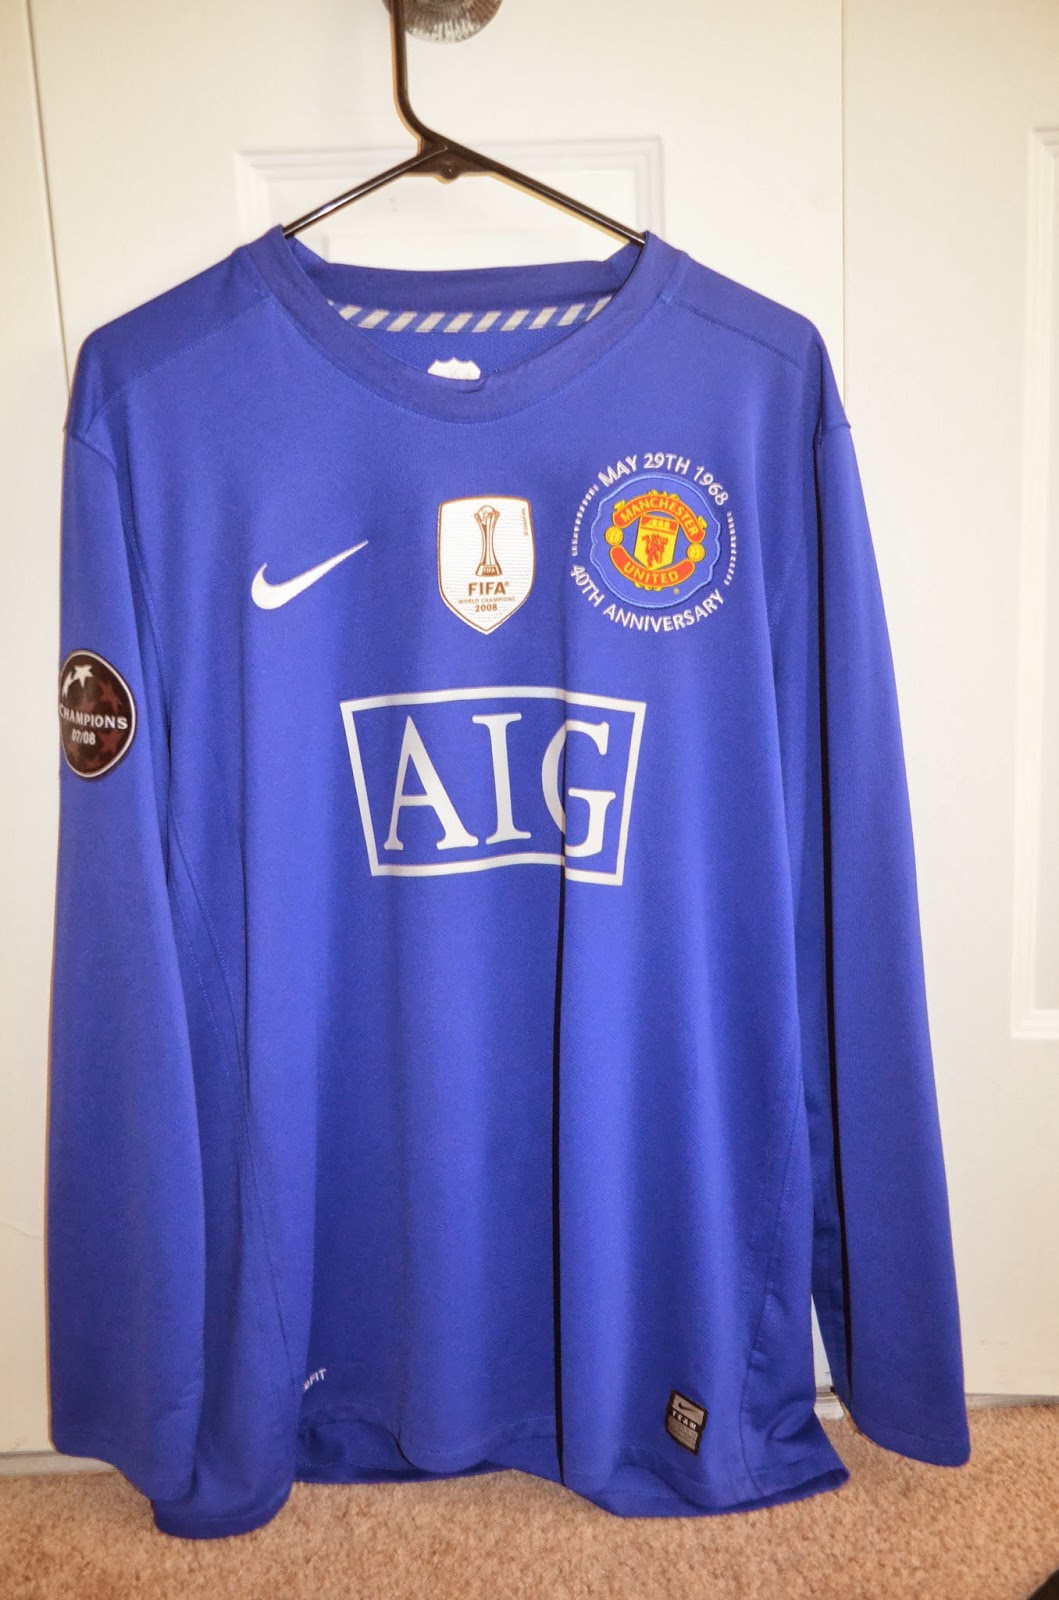 Kit Collection - My Soccer Jersey Collection: Manchester United 2008